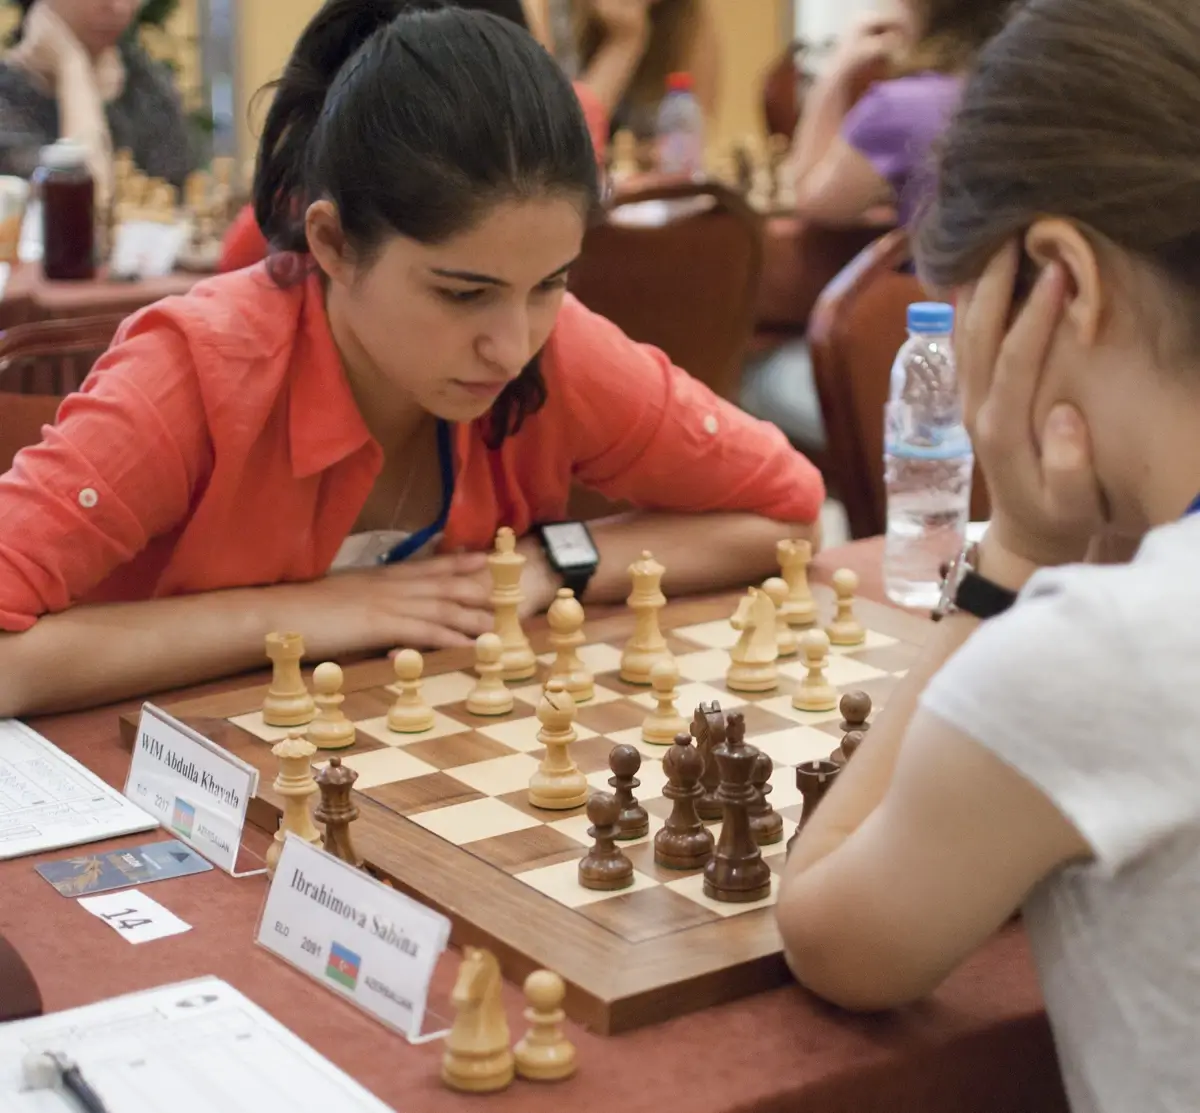 Young Azerbaijani students engrossed in a chess match